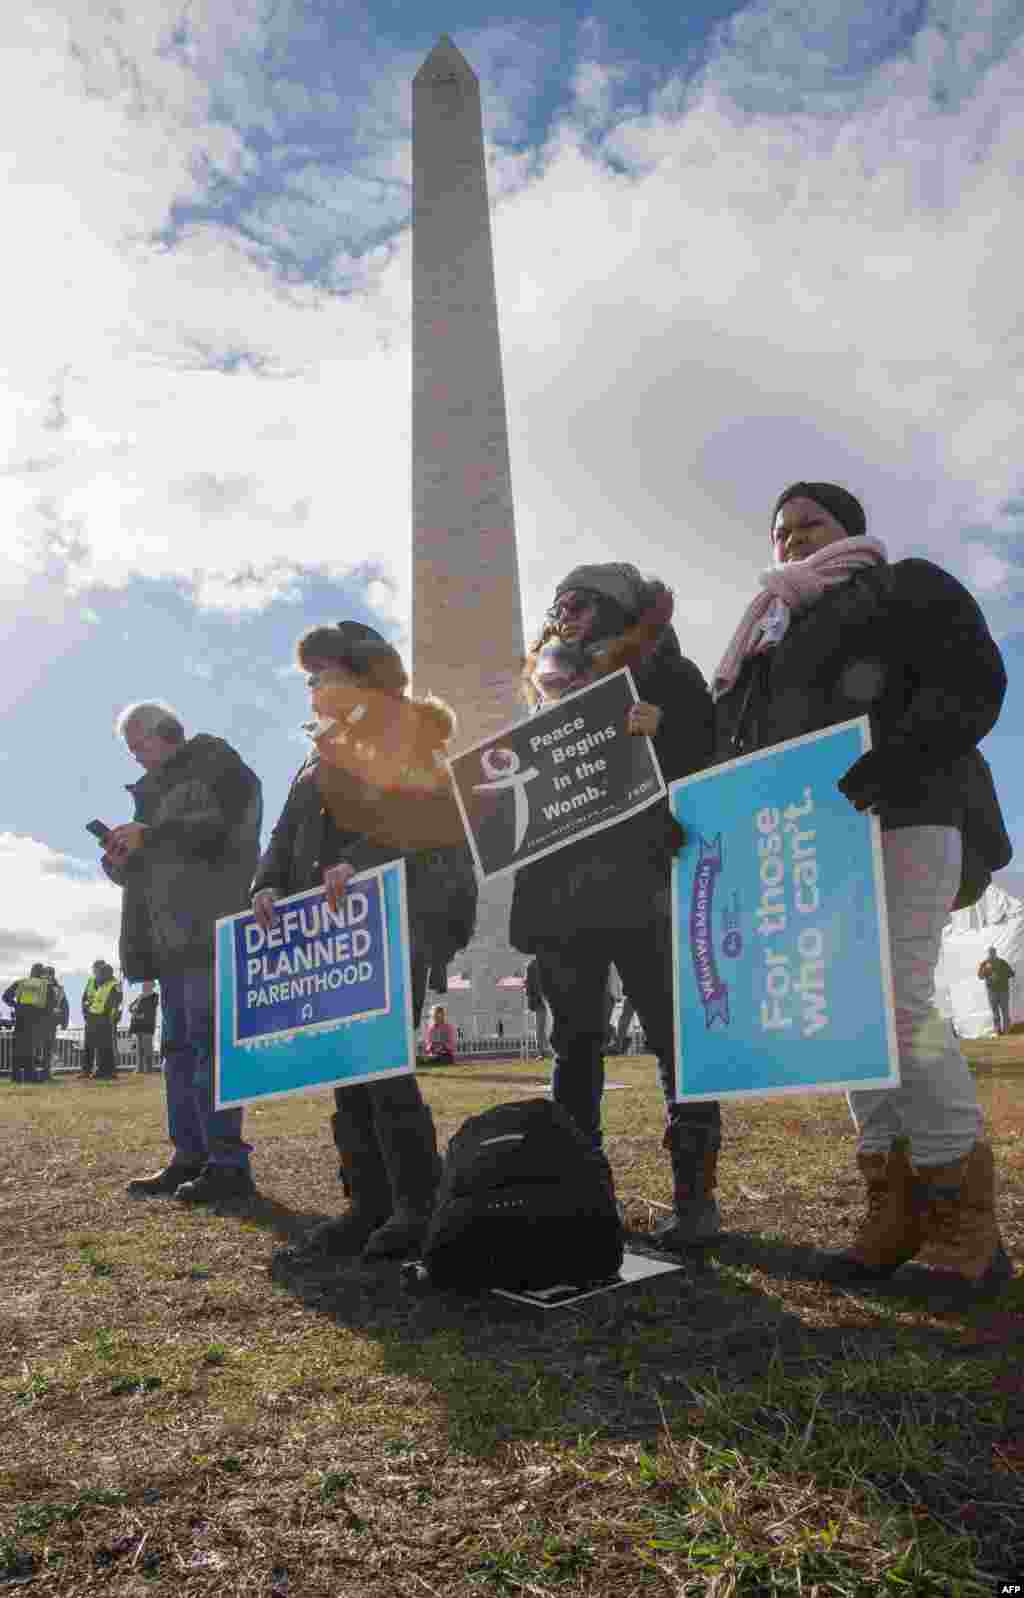 Pro Life supporters gather at the Washington Monument to hear Vice President Mike Pence speak at the March for Life rally on Jan. 27, 2017 in Washington,DC.